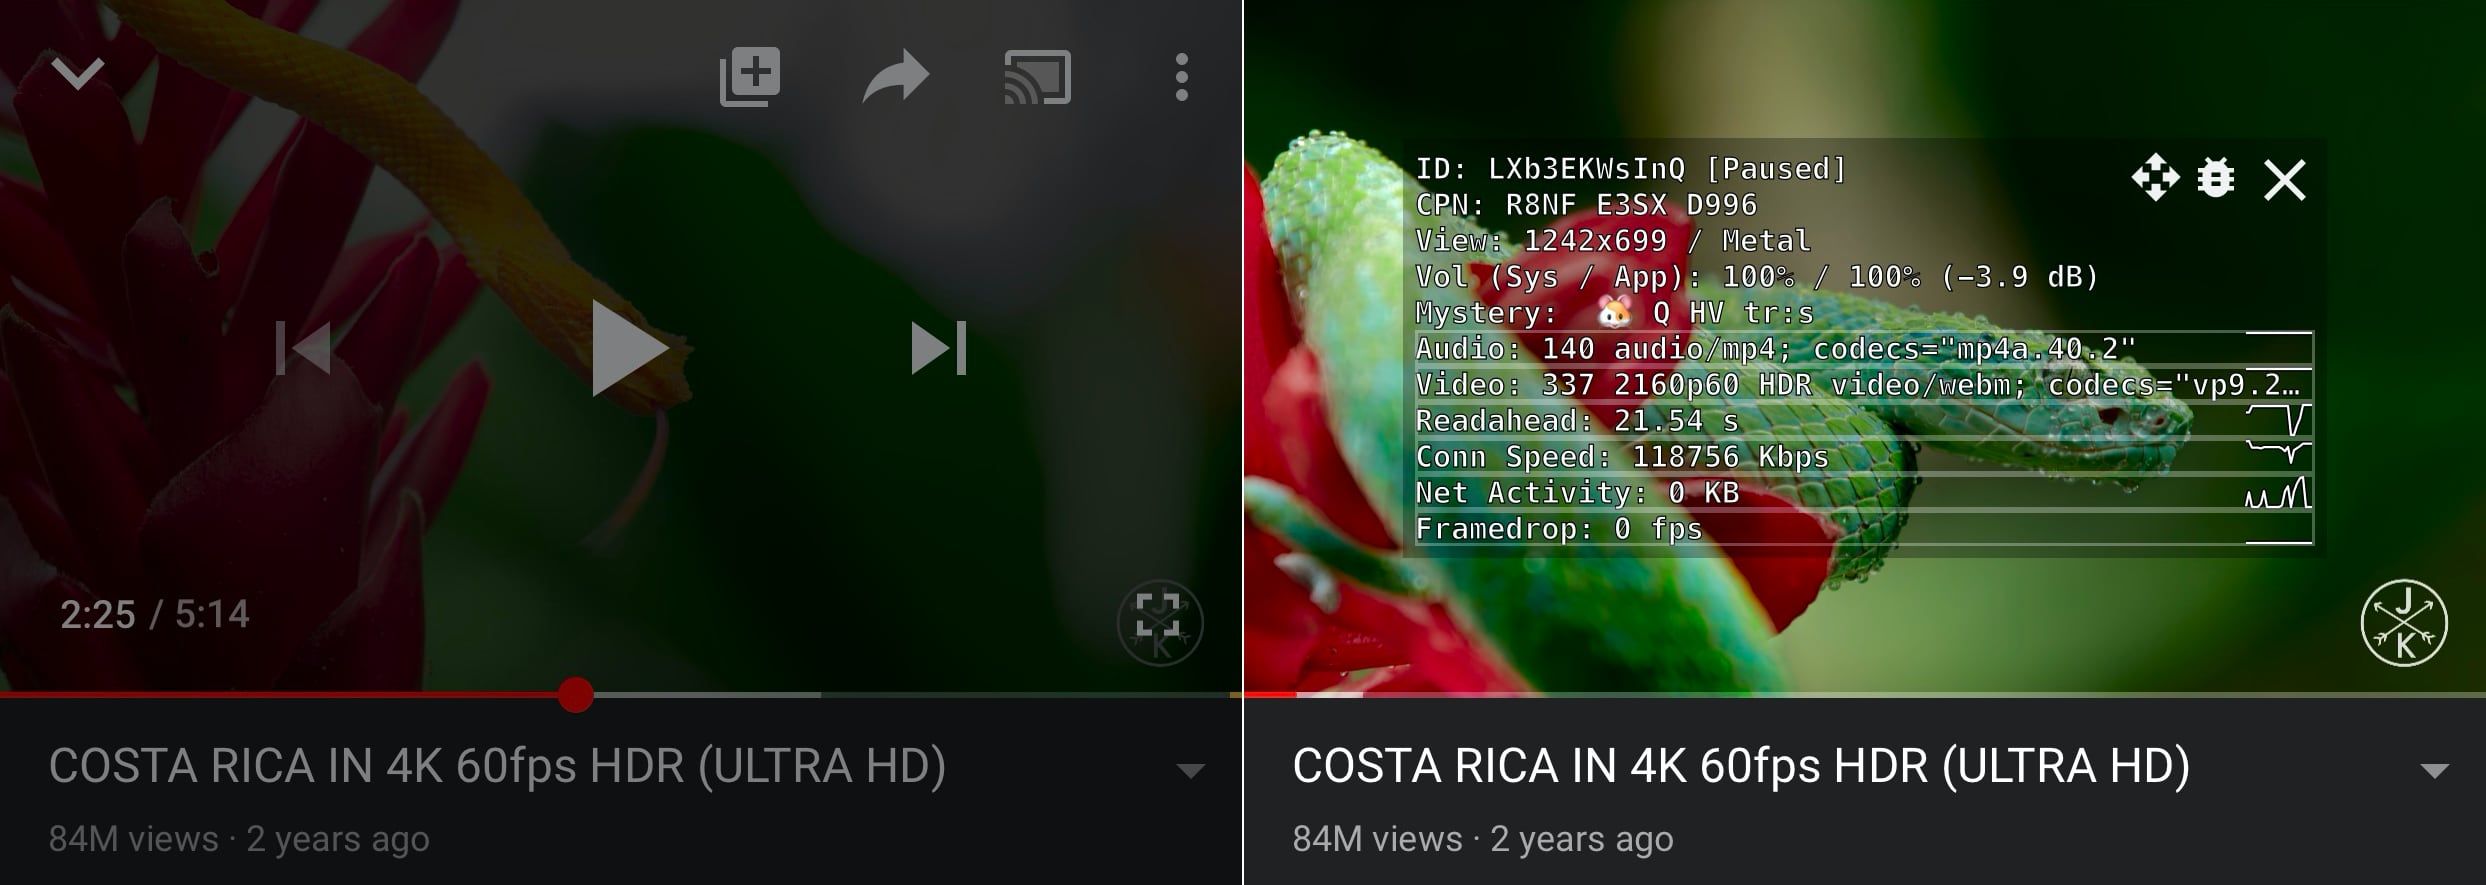 does youtube have 4k hdr videos